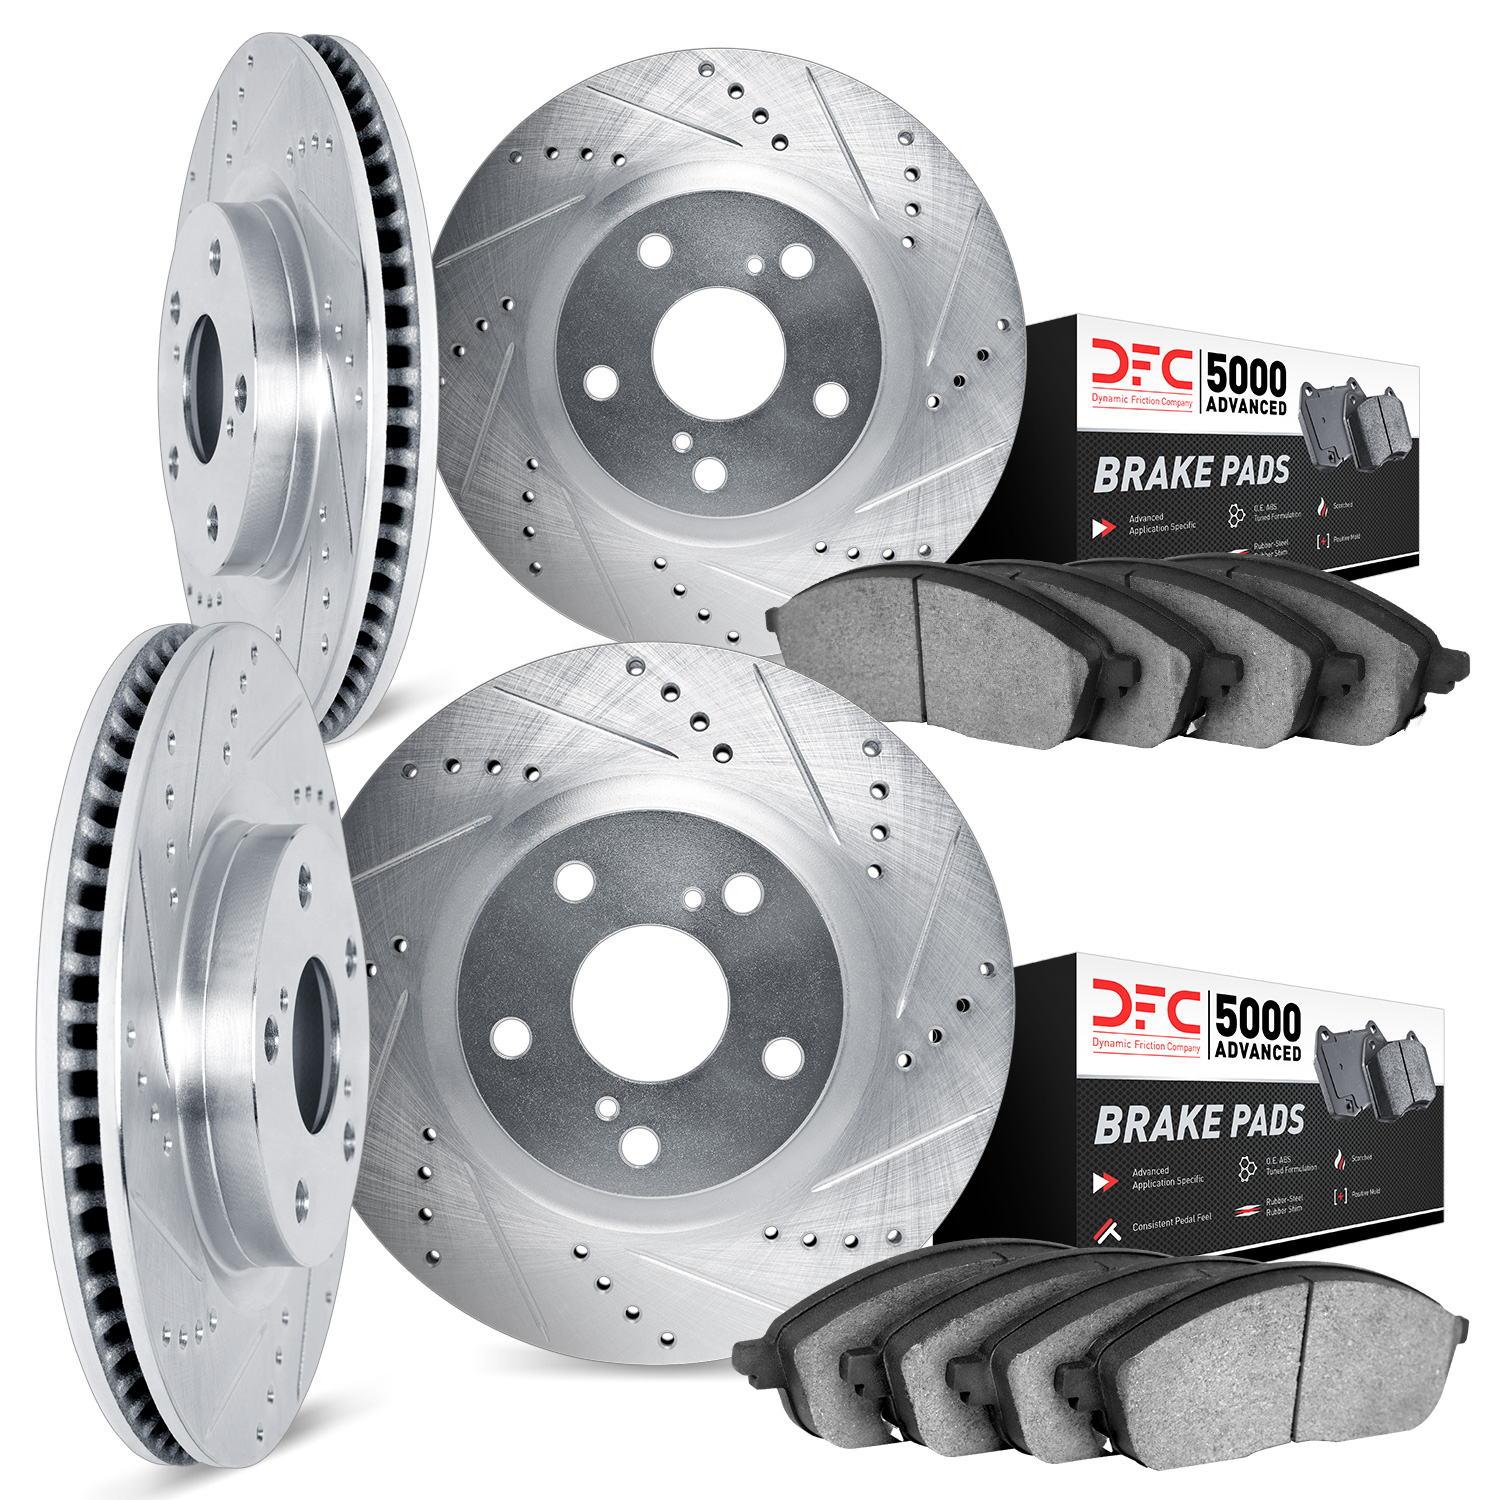 7504-67101 Drilled/Slotted Brake Rotors w/5000 Advanced Brake Pads Kit [Silver], 2003-2004 Infiniti/Nissan, Position: Front and